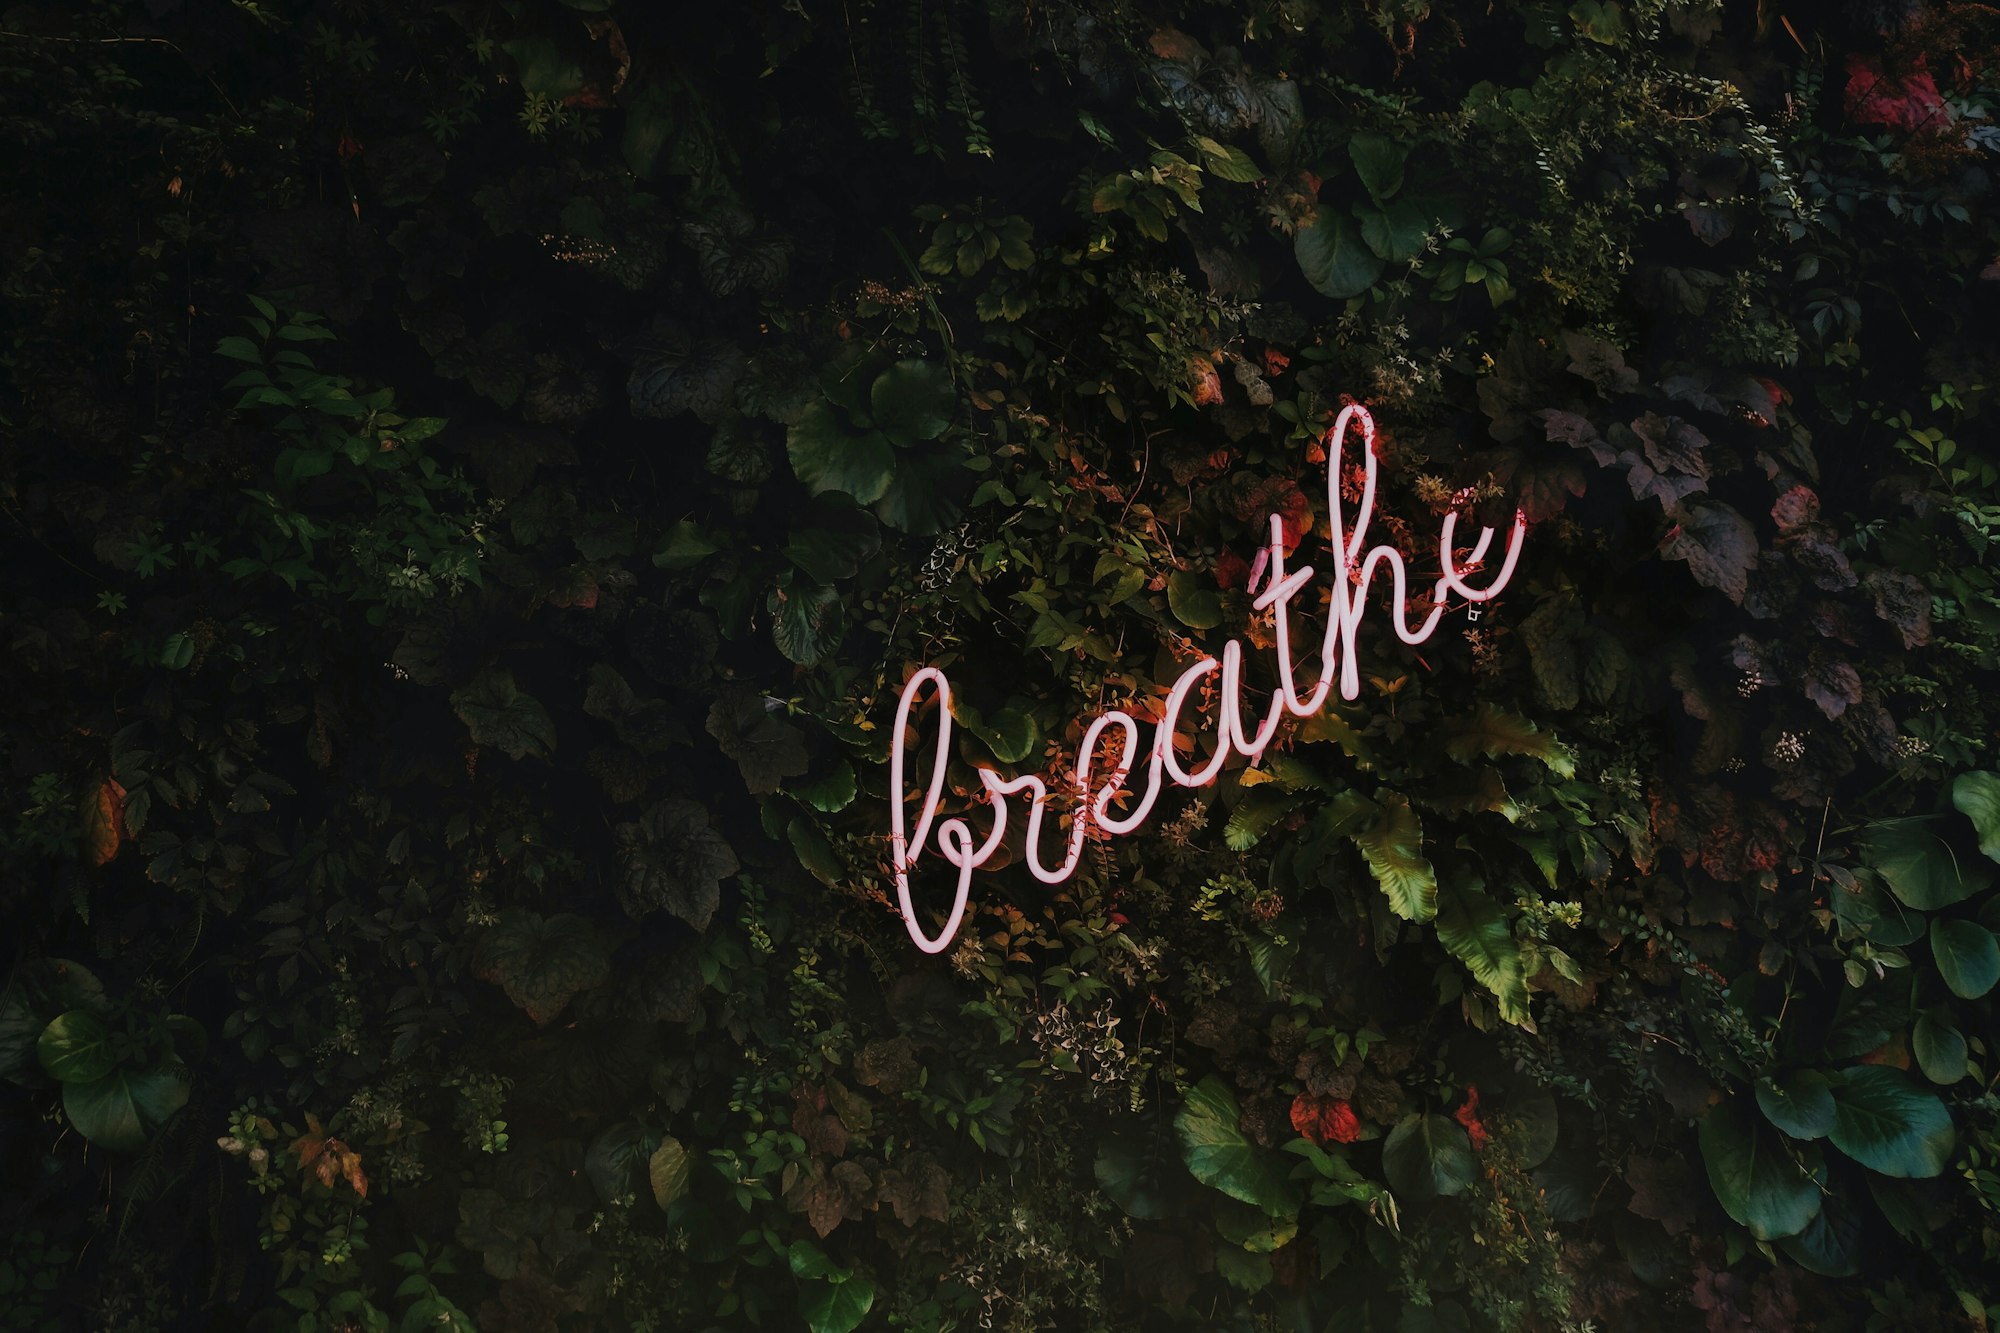 …breathe!

For a full size digital copy (6000x4000px RAW+JPG) of this file, or a high quality print, please contact me via instagram: @timothy.j.goedhart, or email: tim@goedhart-lin.nl

That file would be free to use for any means except direct reselling (copywrite is included in metadata).

When using this free image online: please tag, credit and if you want, follow me on Instagram. 